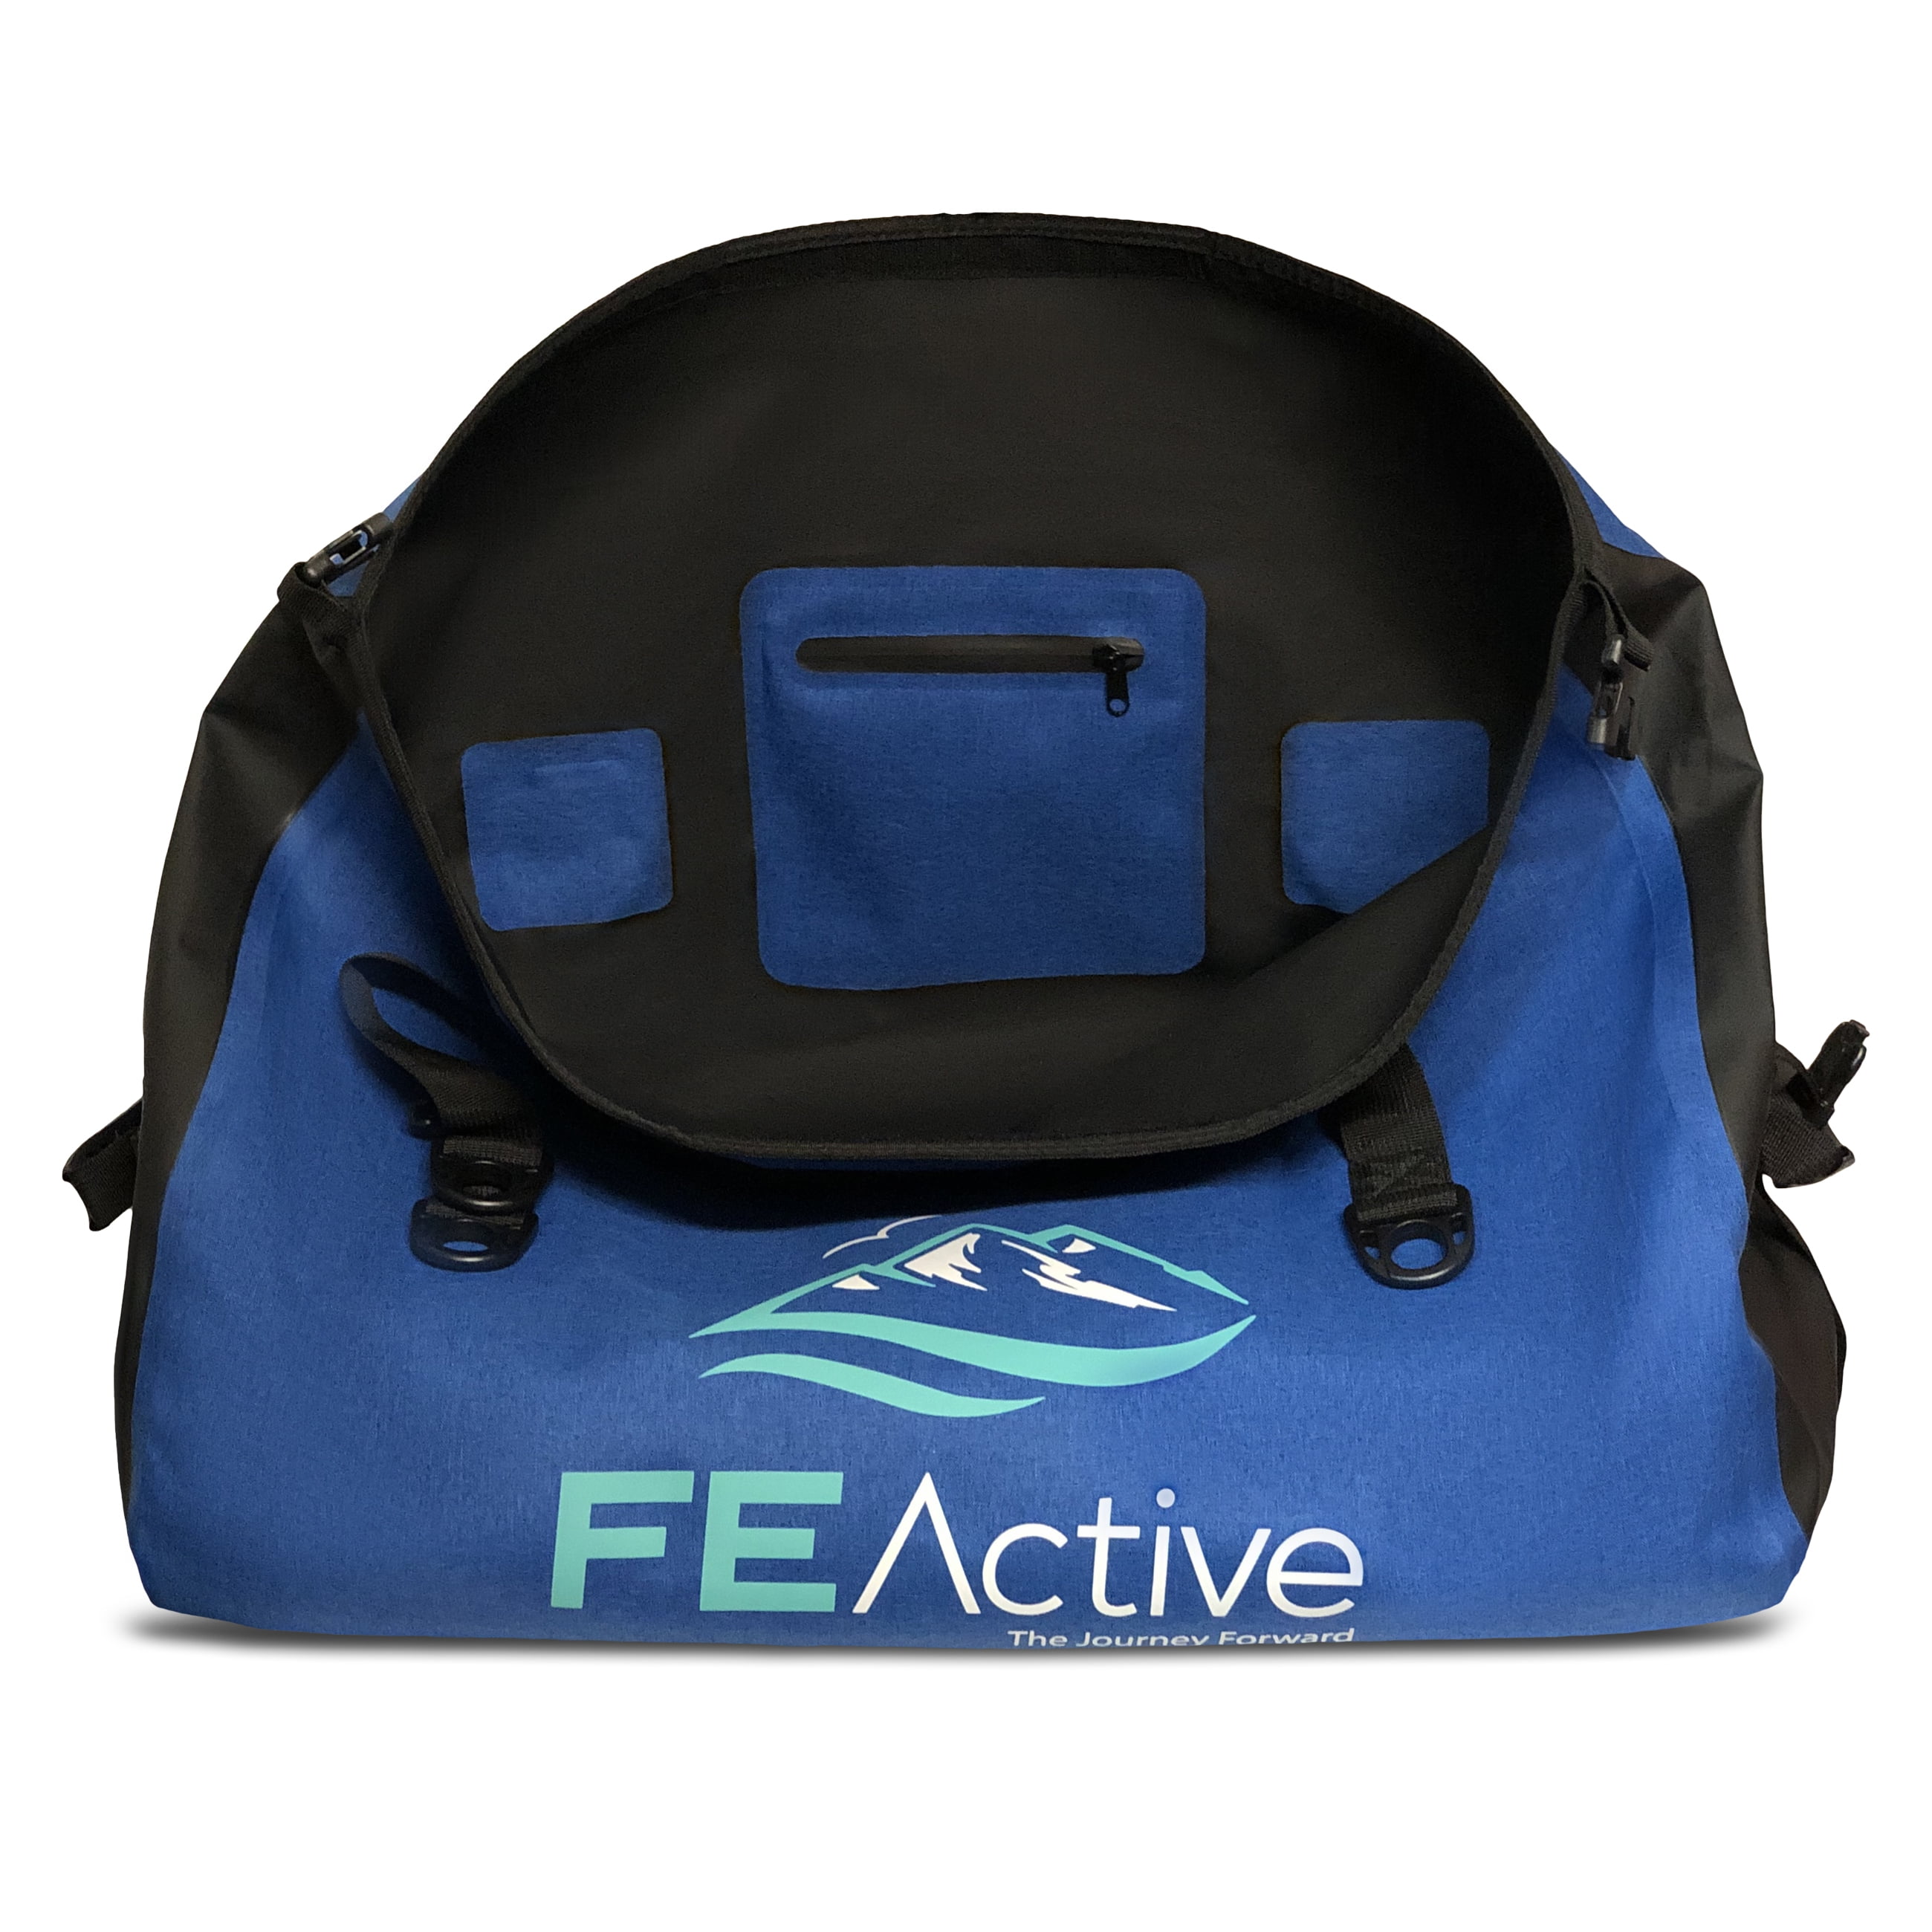 FE Active 60 Liters Duffel Dry Bag Large Waterproof Sack for Travel and Camping 